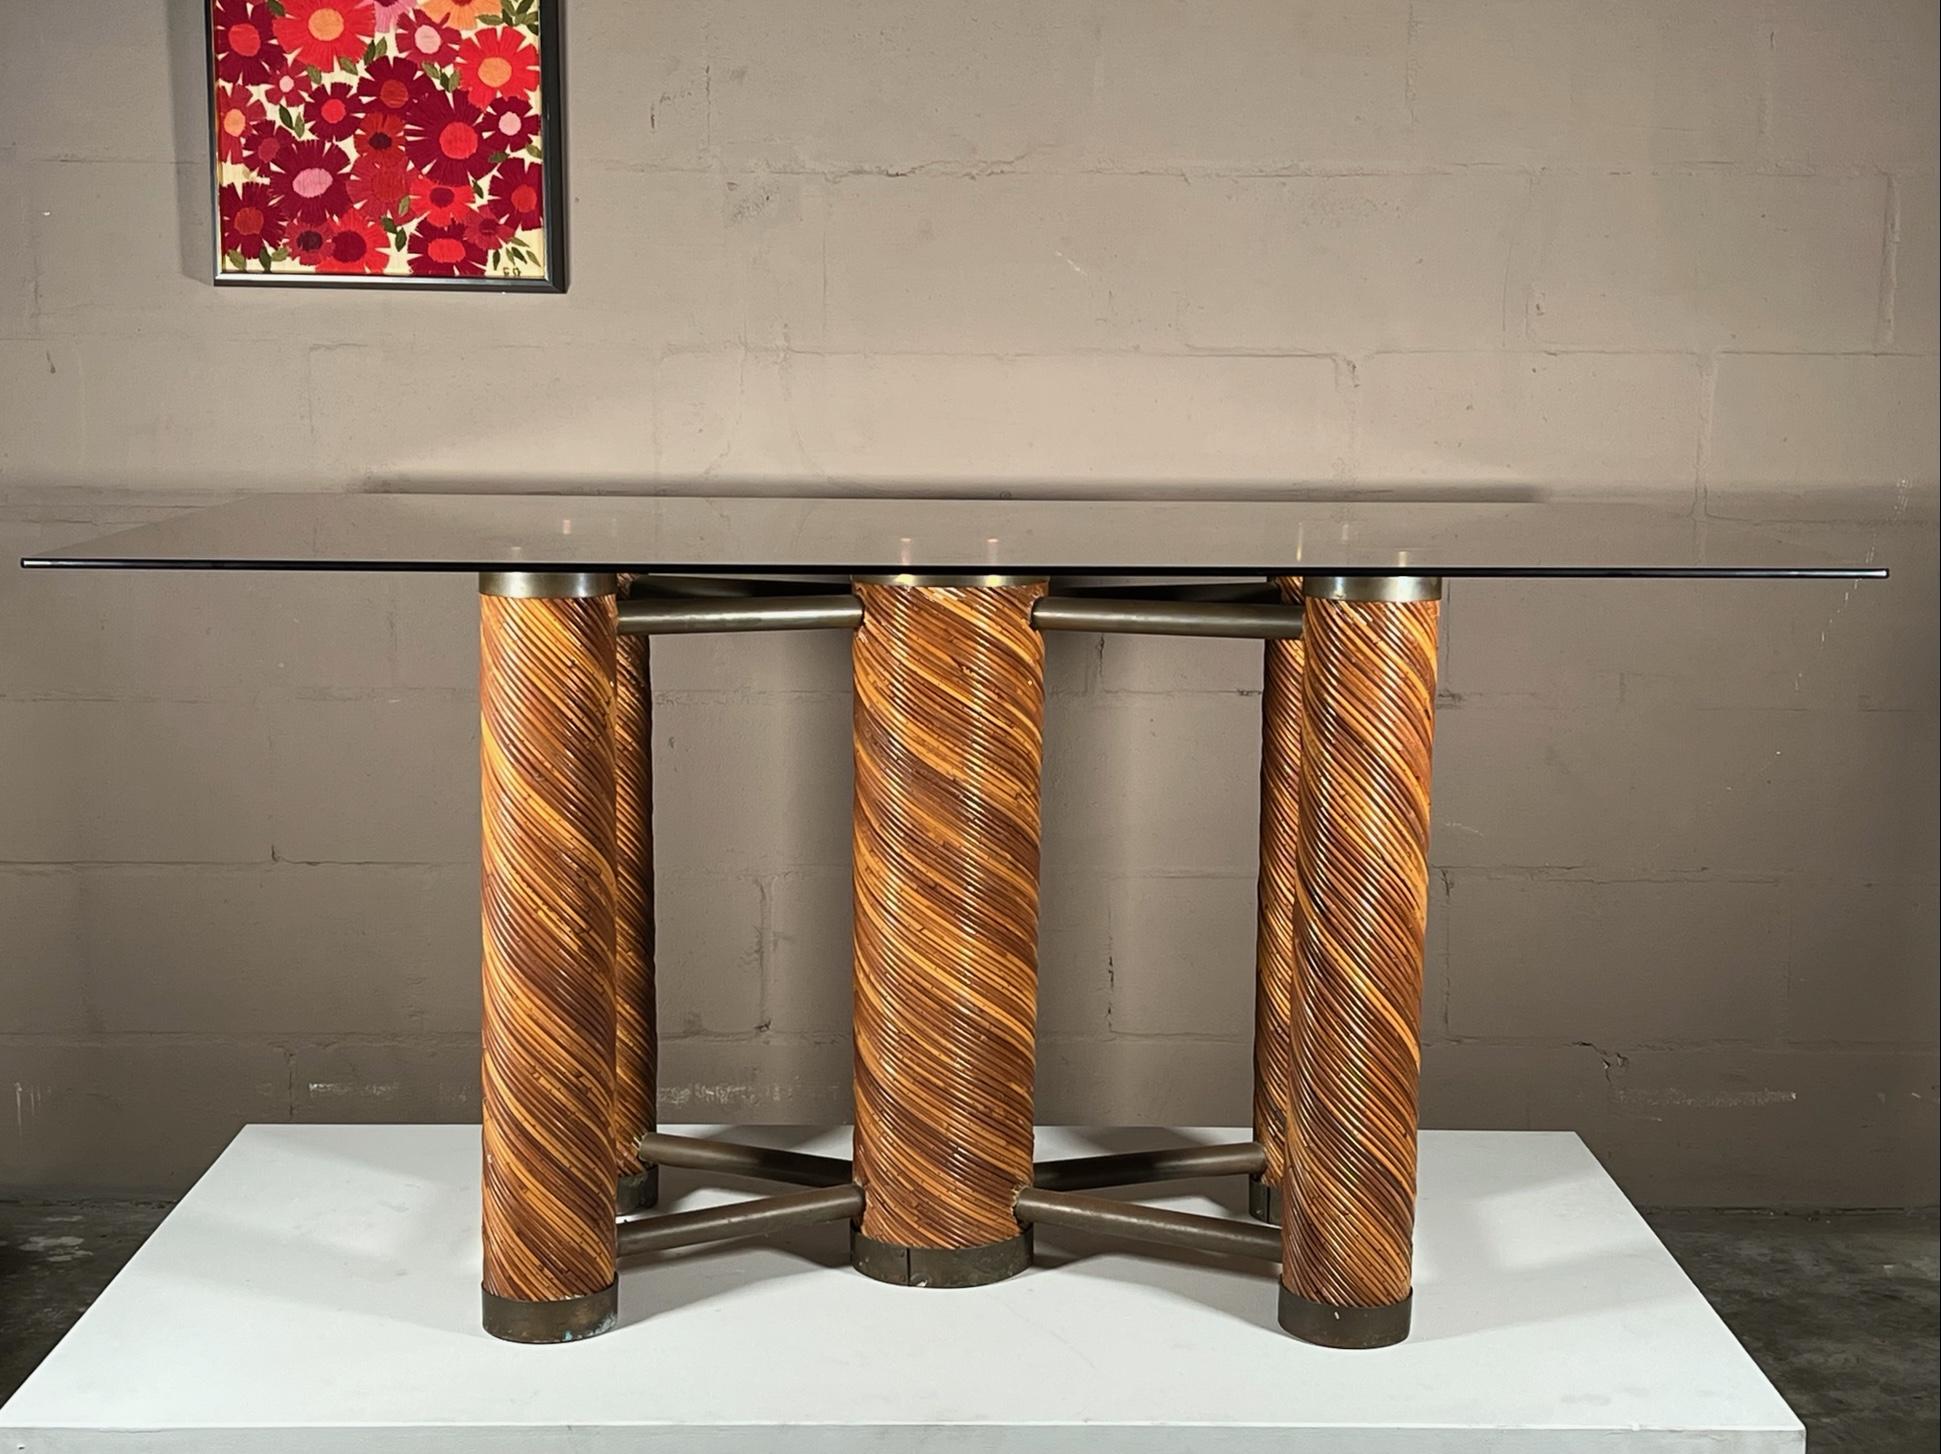 Unusual and rare table. Pencil reed/bamboo with brass, heavy and well made ca' 1970's. Could be a dining table or with smaller piece of glass a console table. Has a great futuristic 1970's atomic look. Base alone measures 34